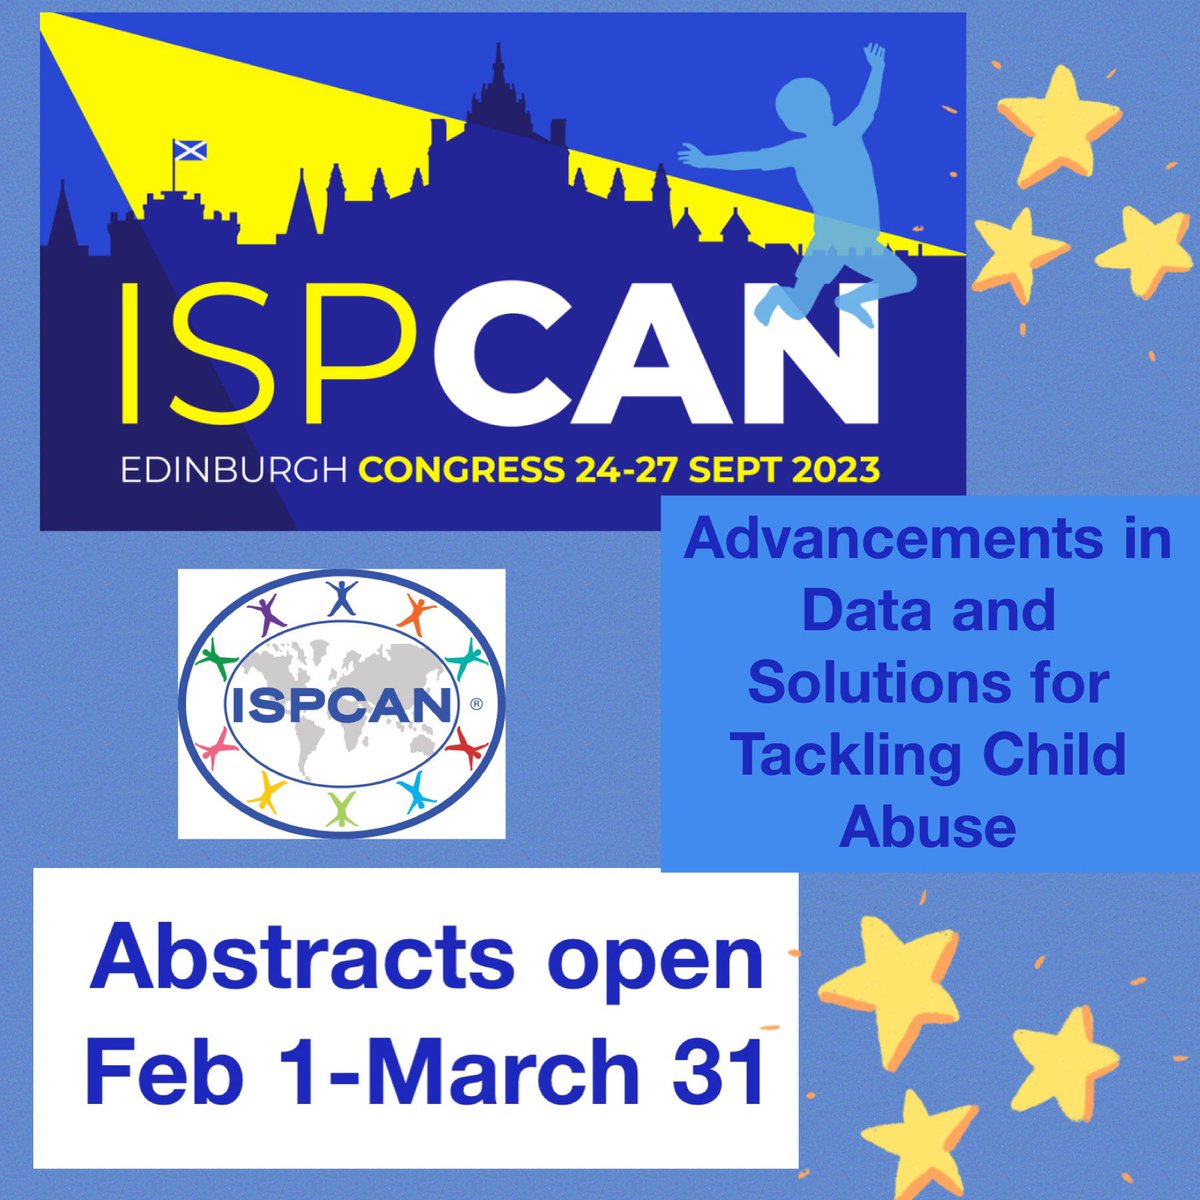 ISPCAN Edinburgh Congress. Abstracts Open! Learn more & Submit today: mailchi.mp/ispcan.org/isp…
#makingdatacount #tacklingchildabuse at the #ispcanedinburgh congress this year!
#childabuseprevention 
#ispcan
#childlight
#congress
#edinburgh
#abstracts